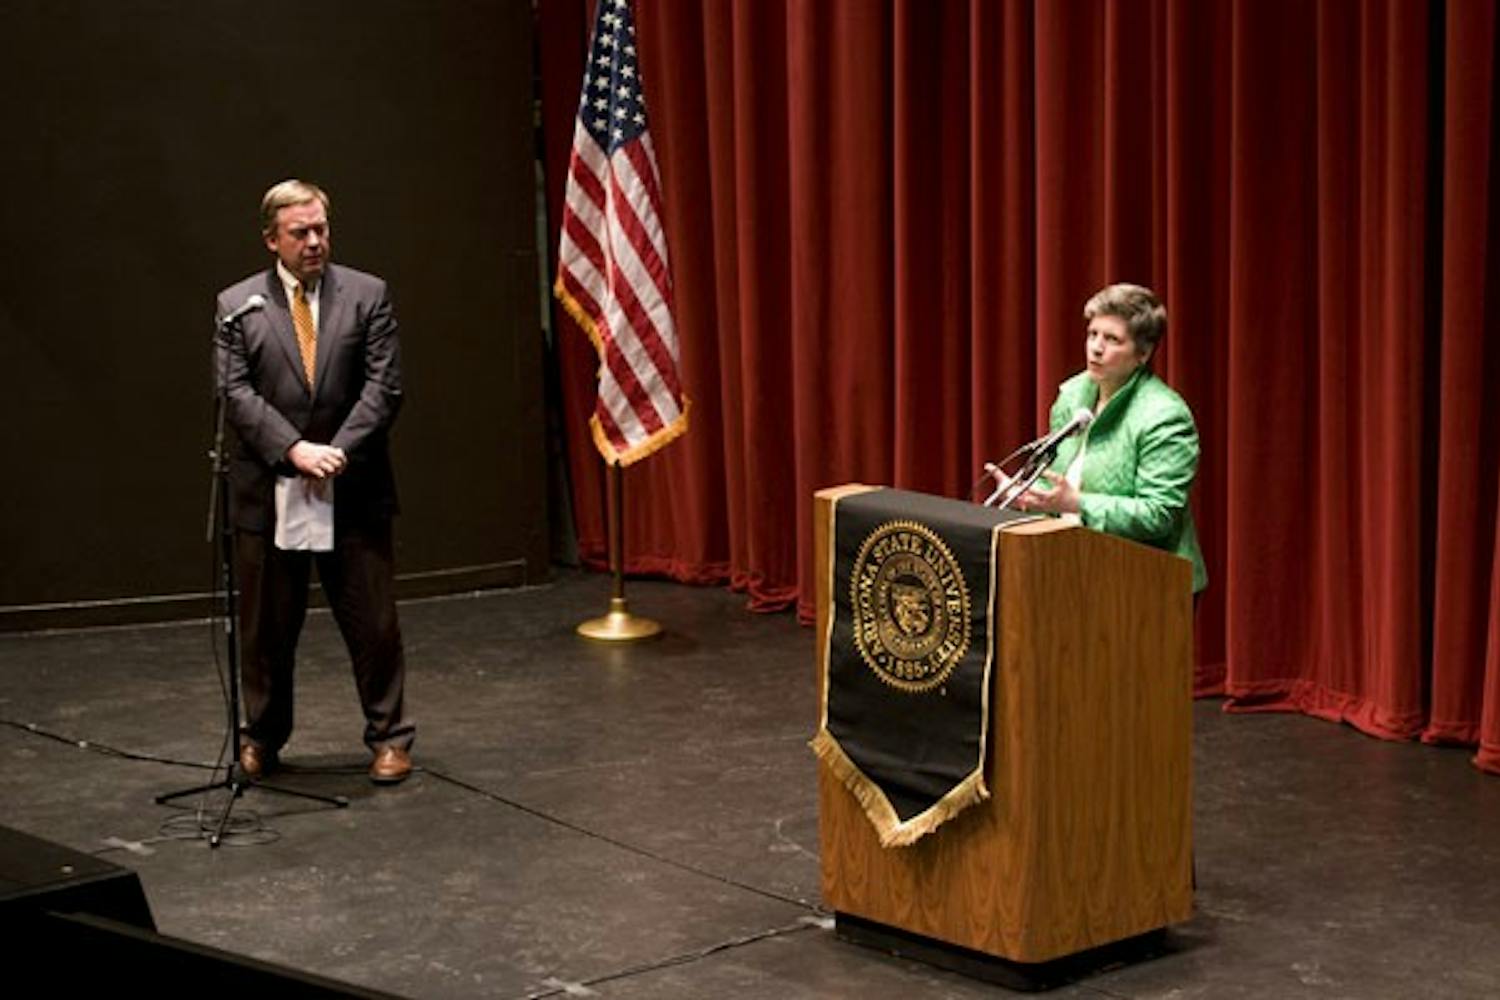 QUESTIONS OF SECURITY: ASU President Michael Crow reads audience questions to Secretary of Homeland Security Janet Napolitano Thursday night. Napolitano gave a lecture at ASU, speaking of her goals with the Homeland Security Department. (Photo by Molly J. Smith)